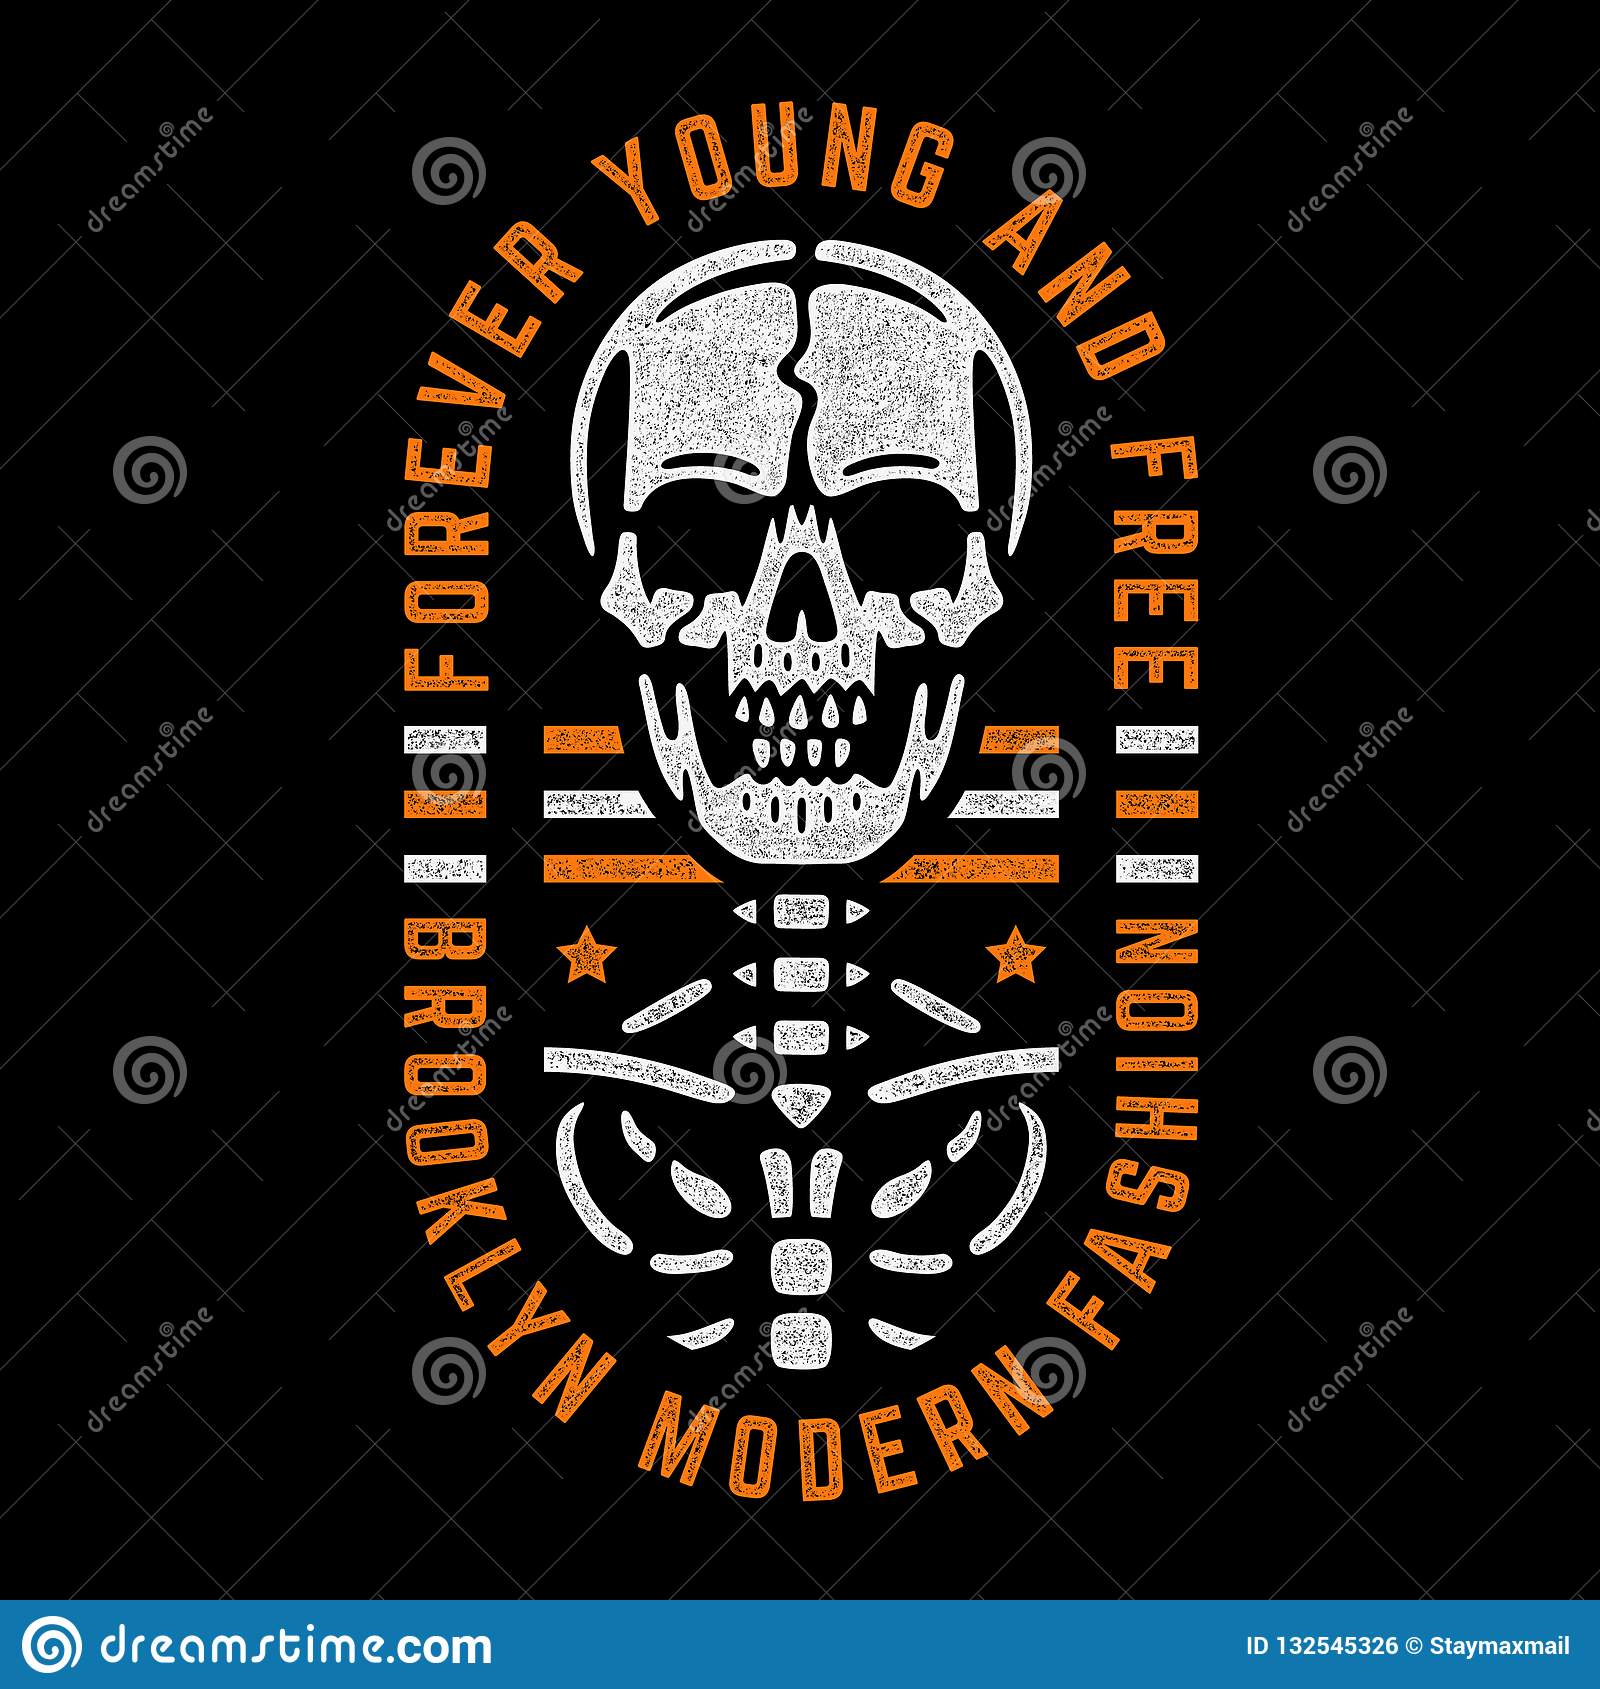 forever young mp3 download skull